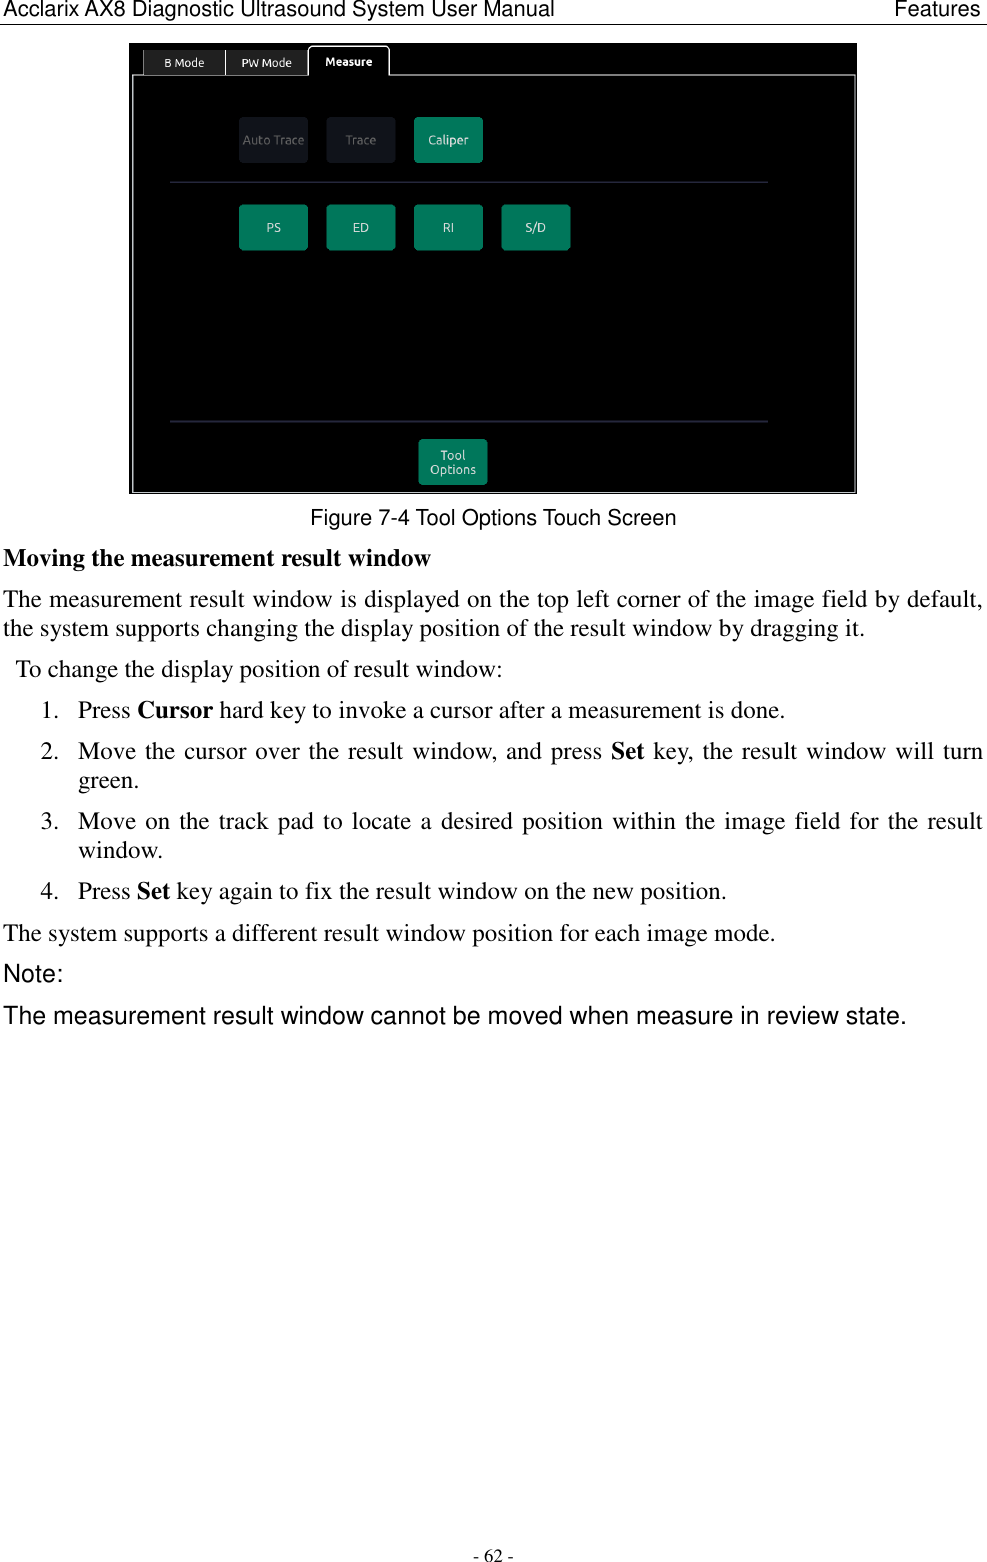 Acclarix AX8 Diagnostic Ultrasound System User Manual                                                              Features - 62 -  Figure 7-4 Tool Options Touch Screen Moving the measurement result window The measurement result window is displayed on the top left corner of the image field by default, the system supports changing the display position of the result window by dragging it. To change the display position of result window: 1. Press Cursor hard key to invoke a cursor after a measurement is done. 2. Move the cursor over the result window, and press Set key, the result window will turn green. 3. Move on the track pad to locate a desired position within the image field for the result window. 4. Press Set key again to fix the result window on the new position. The system supports a different result window position for each image mode. Note: The measurement result window cannot be moved when measure in review state. 